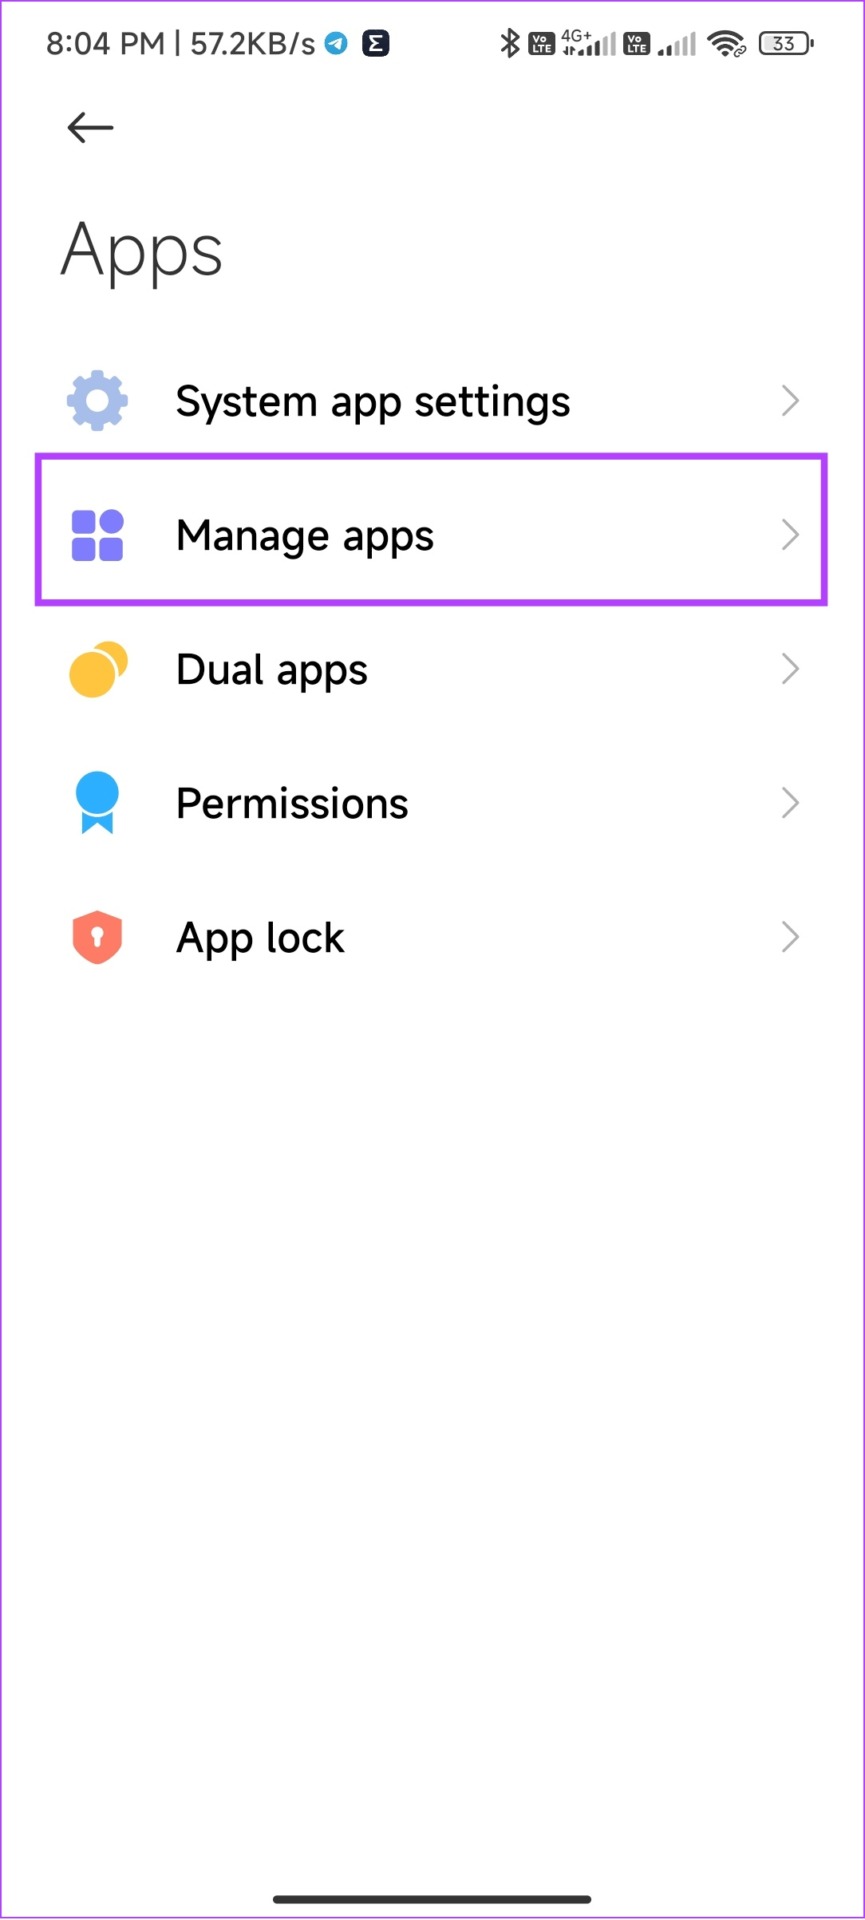 Tap manage apps